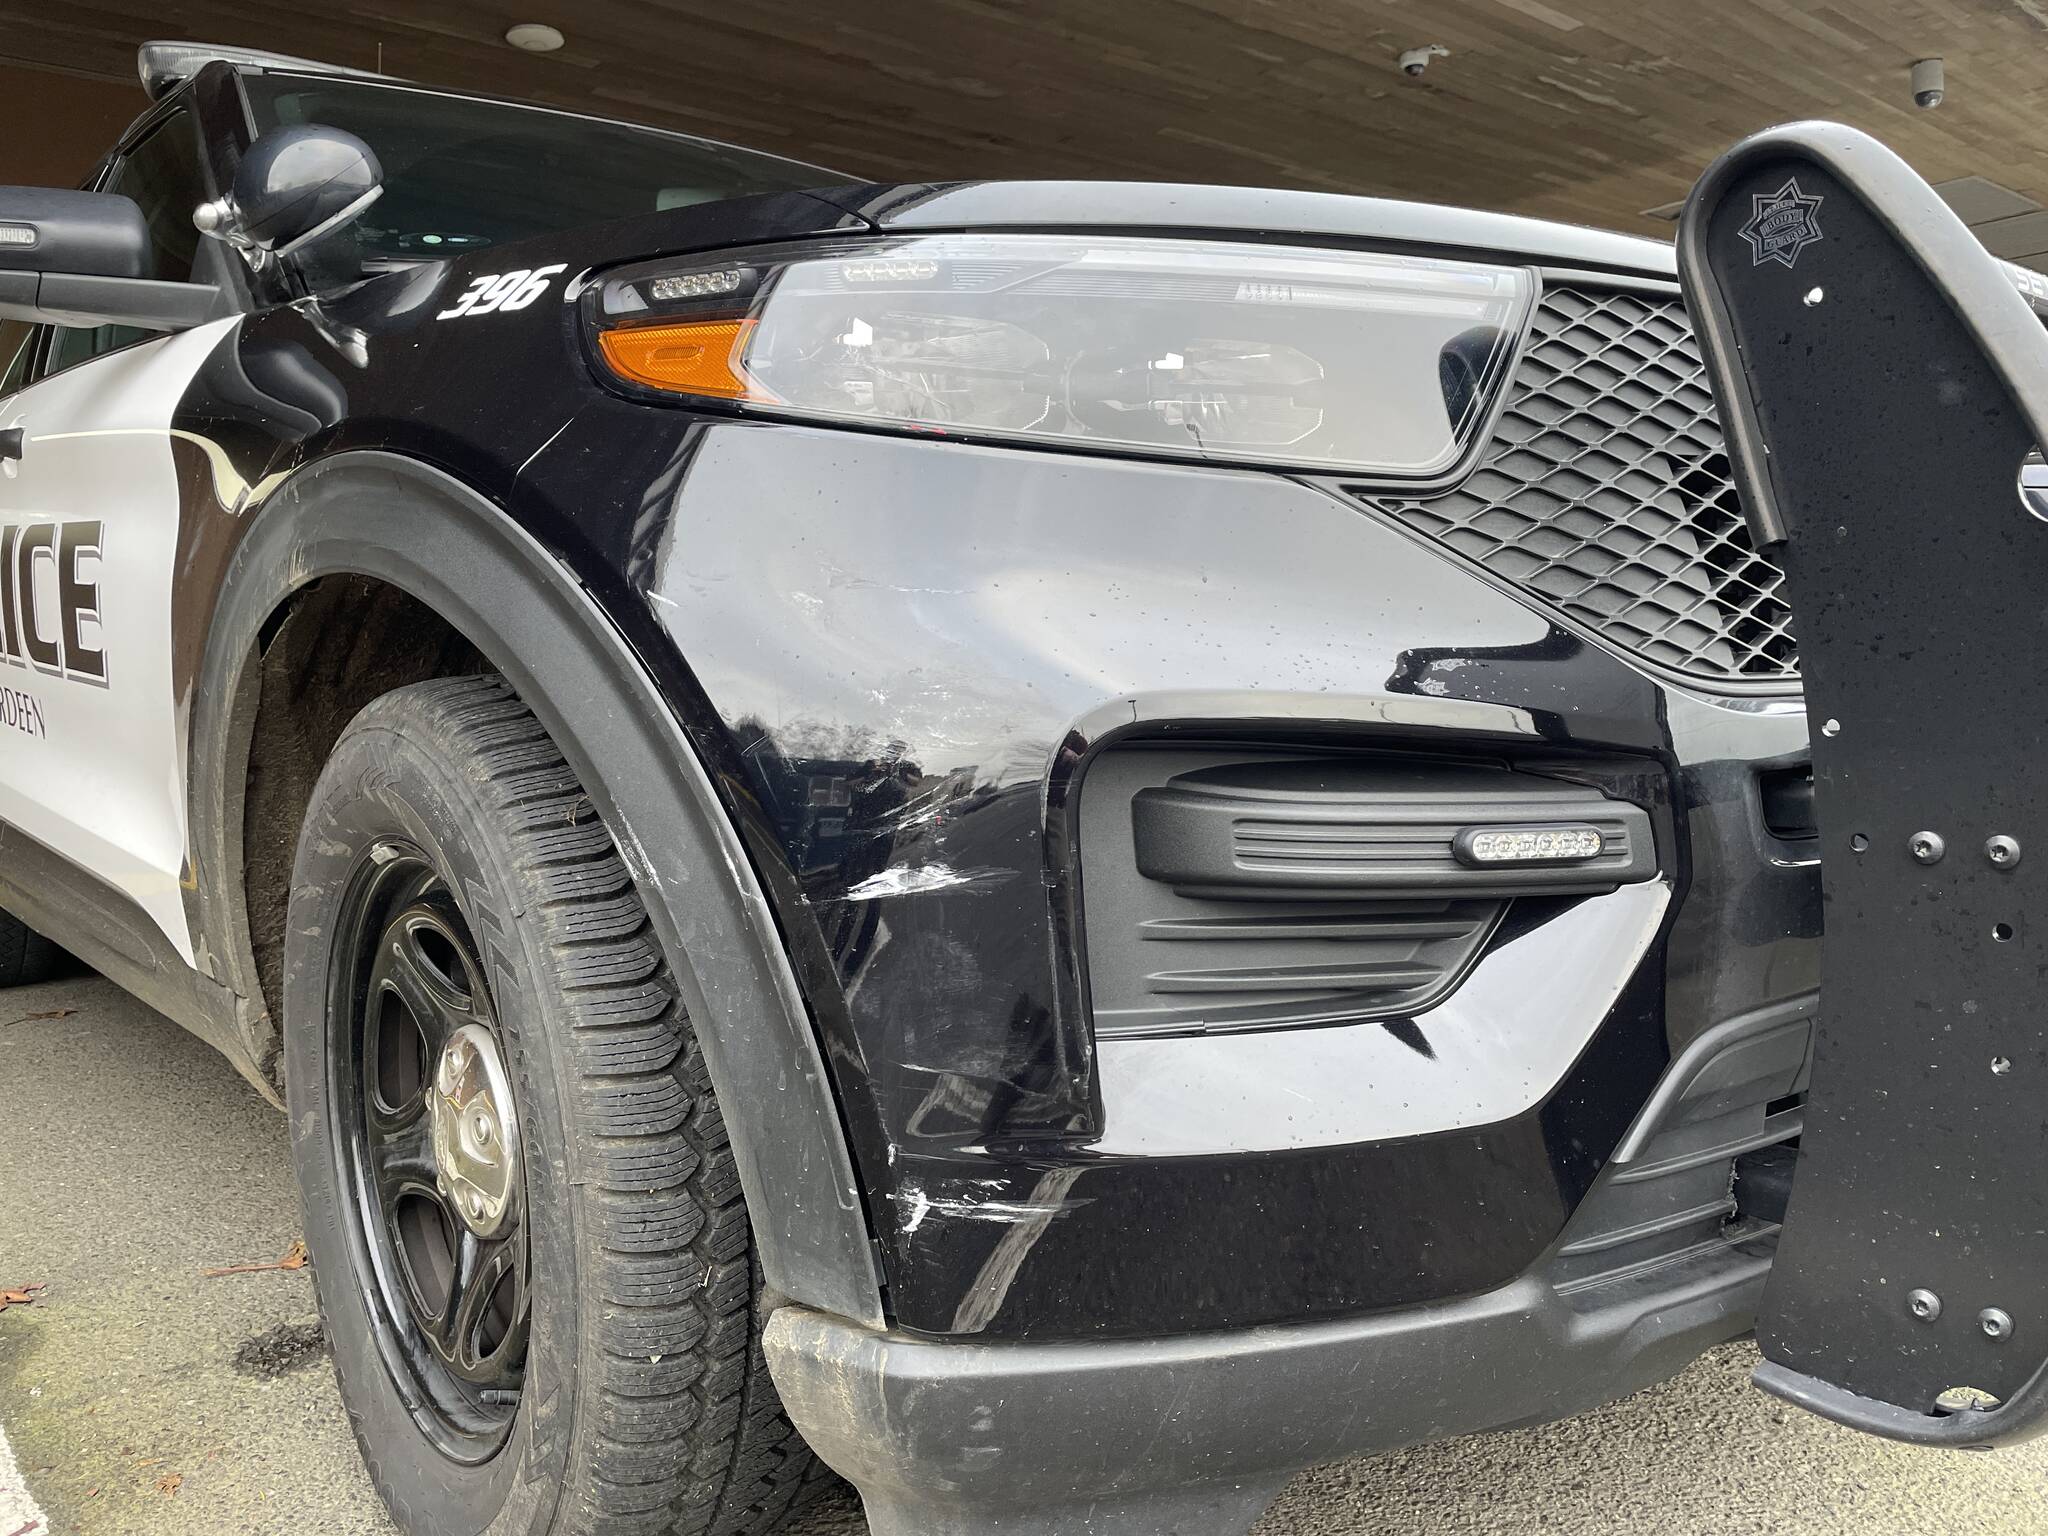 An Aberdeen Police Department patrol car was scuffed while officers attempted to contact a suspect following a report of a possible case of driving under the influence on Monday, Jan. 23. (Michael S. Lockett / The Daily World)